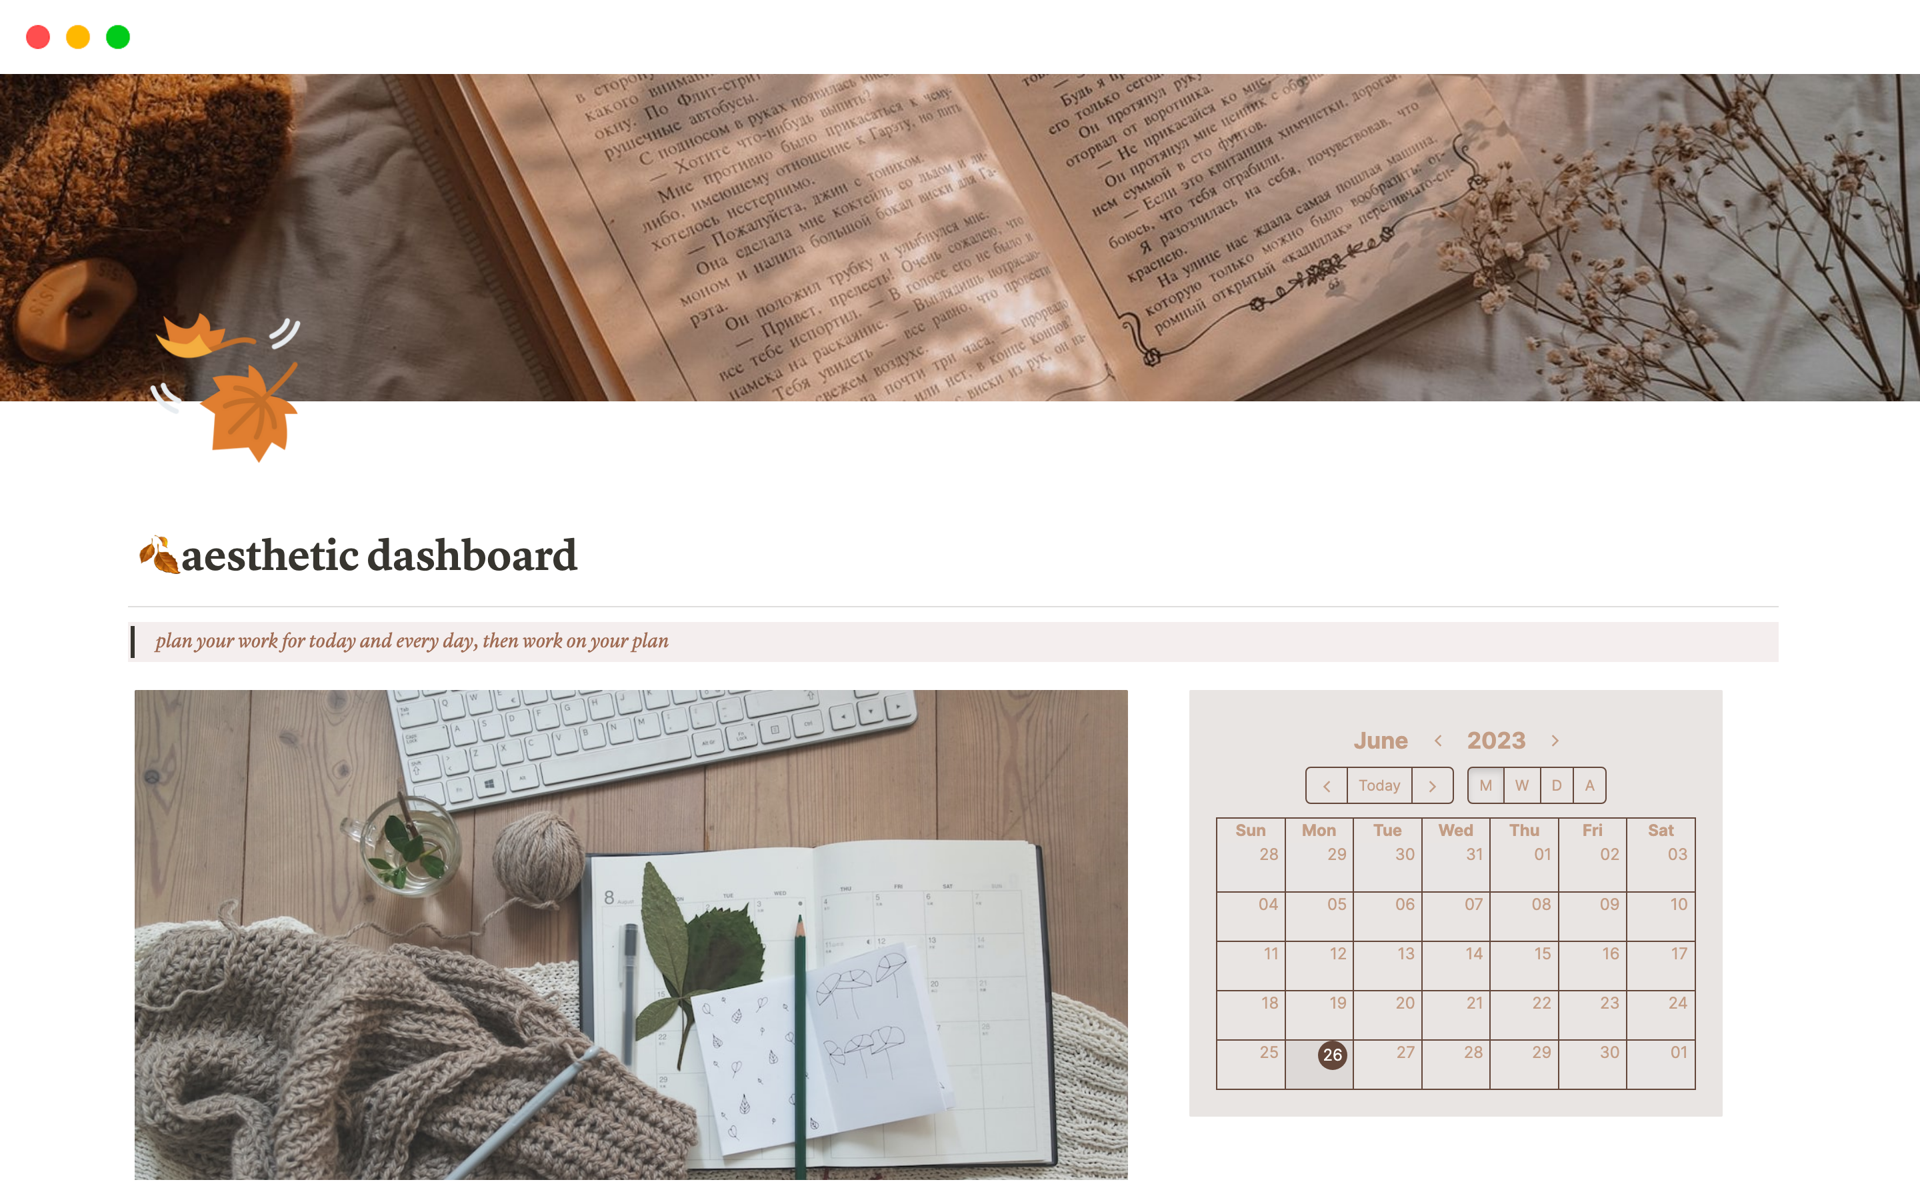 The Aesthetic Daily Dashboard Notion Template offers a visually appealing and organized layout to track and manage daily tasks and goals, finances, meal planning, book tracking, and more.